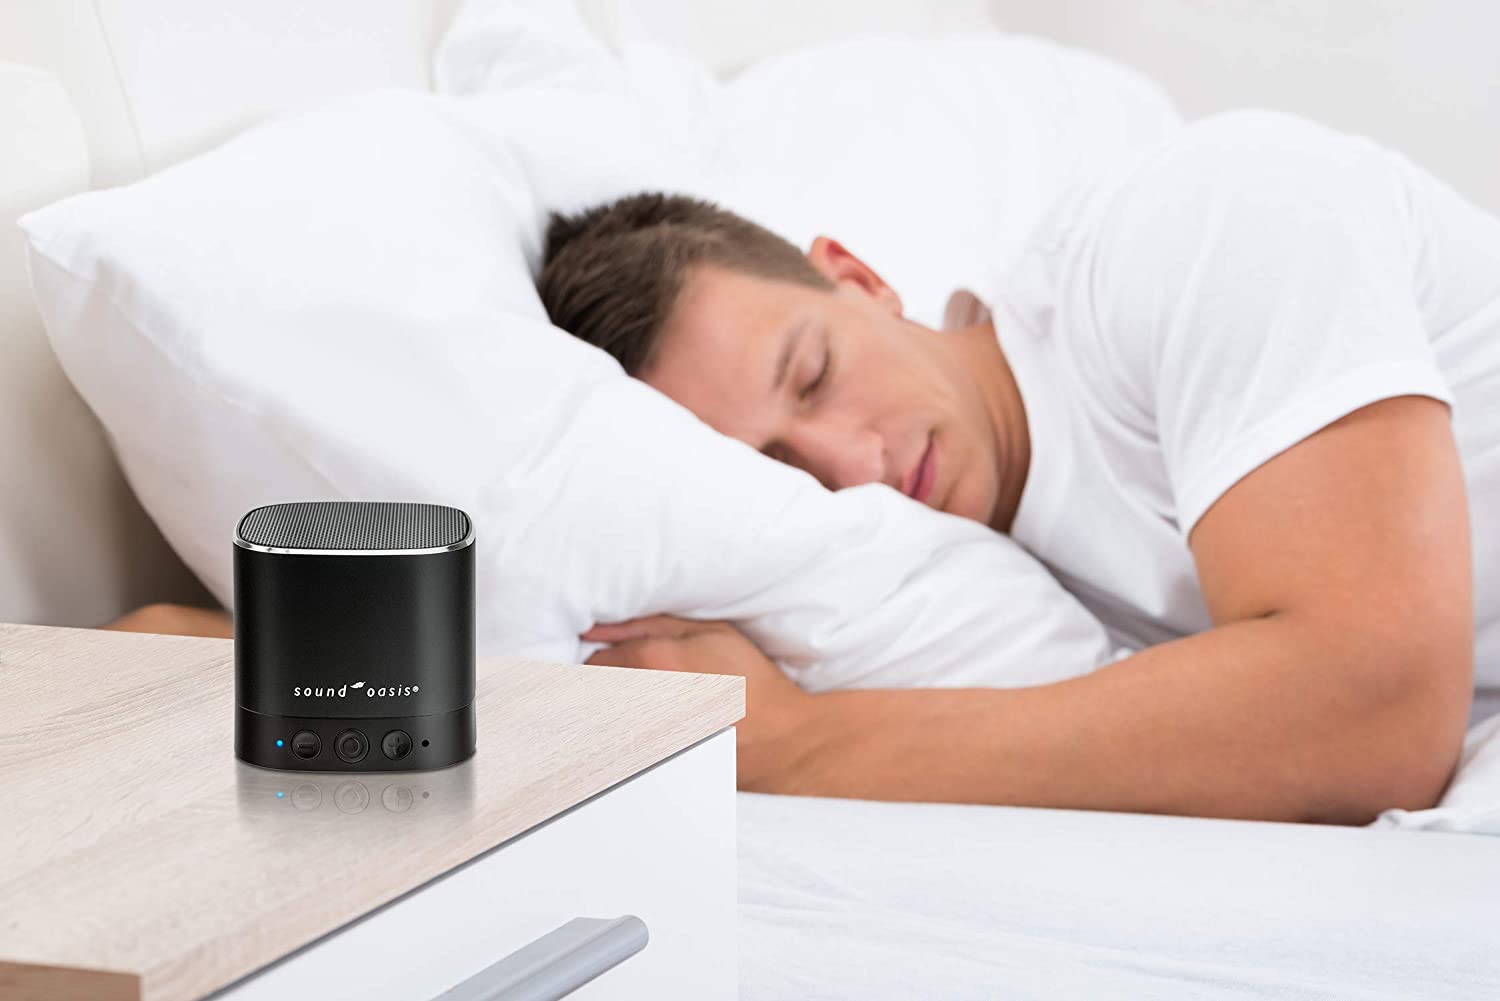 A Sound Oasis Bluetooth Sound Therapy System for tinnitus is on a bedside table. A man is sleeping in the background.